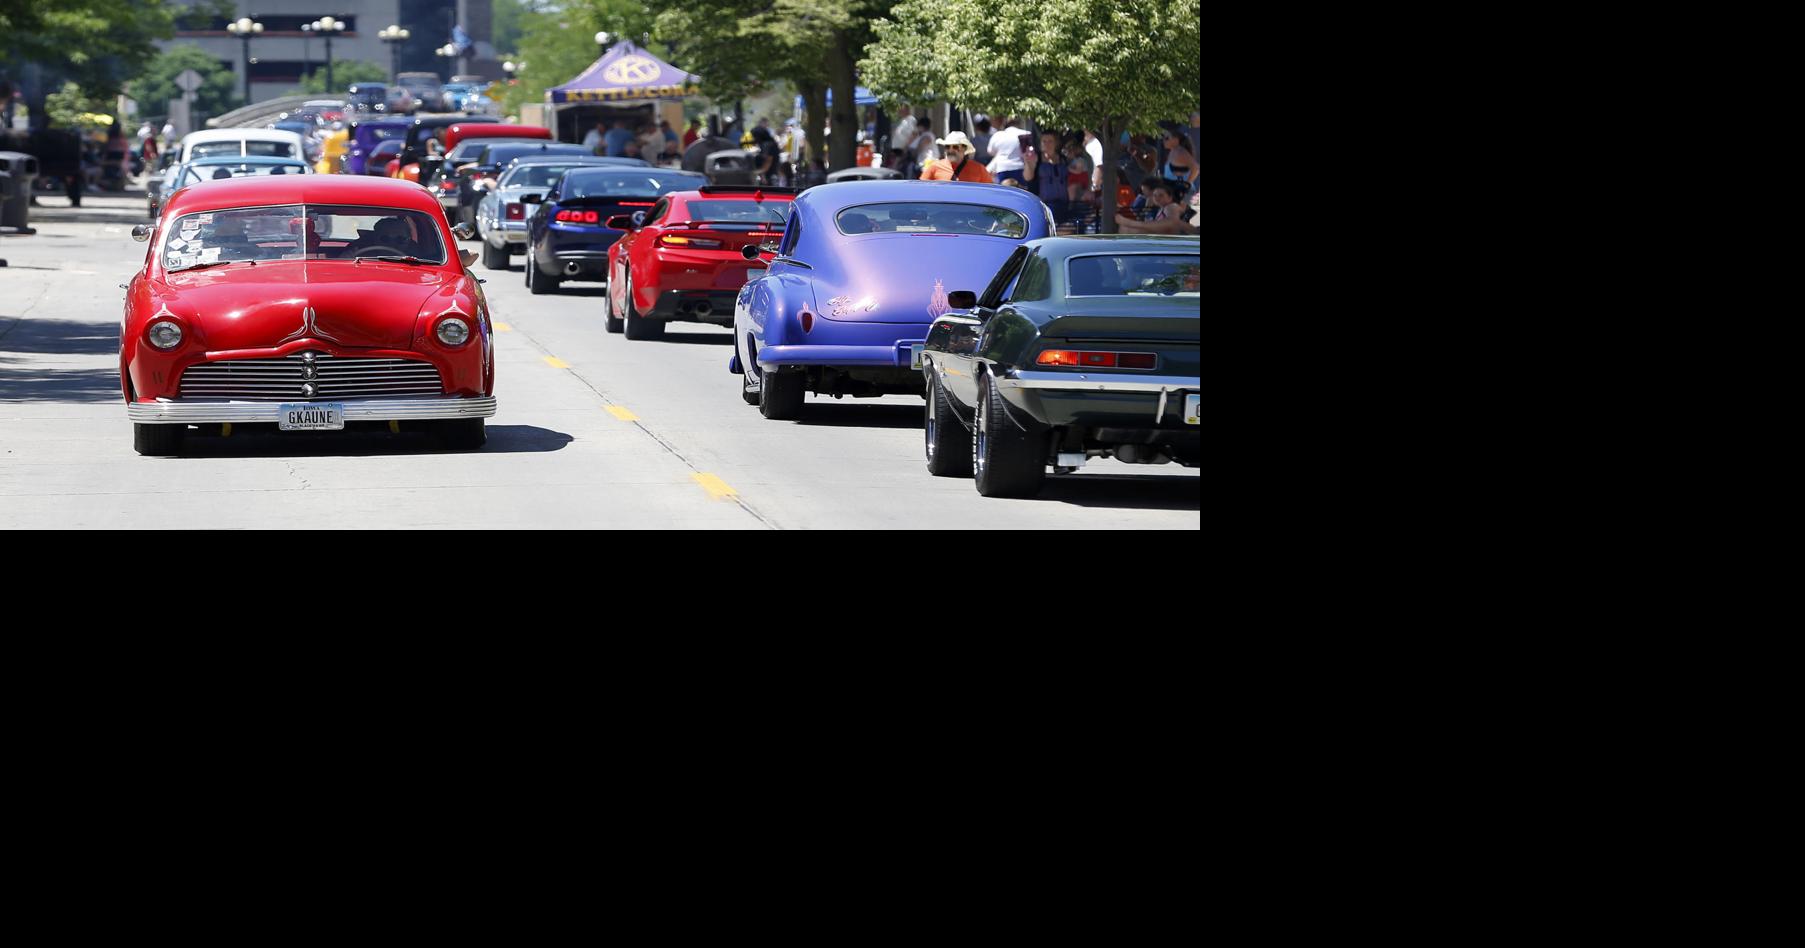 Fourth Street Cruise returns to downtown Waterloo on Saturday